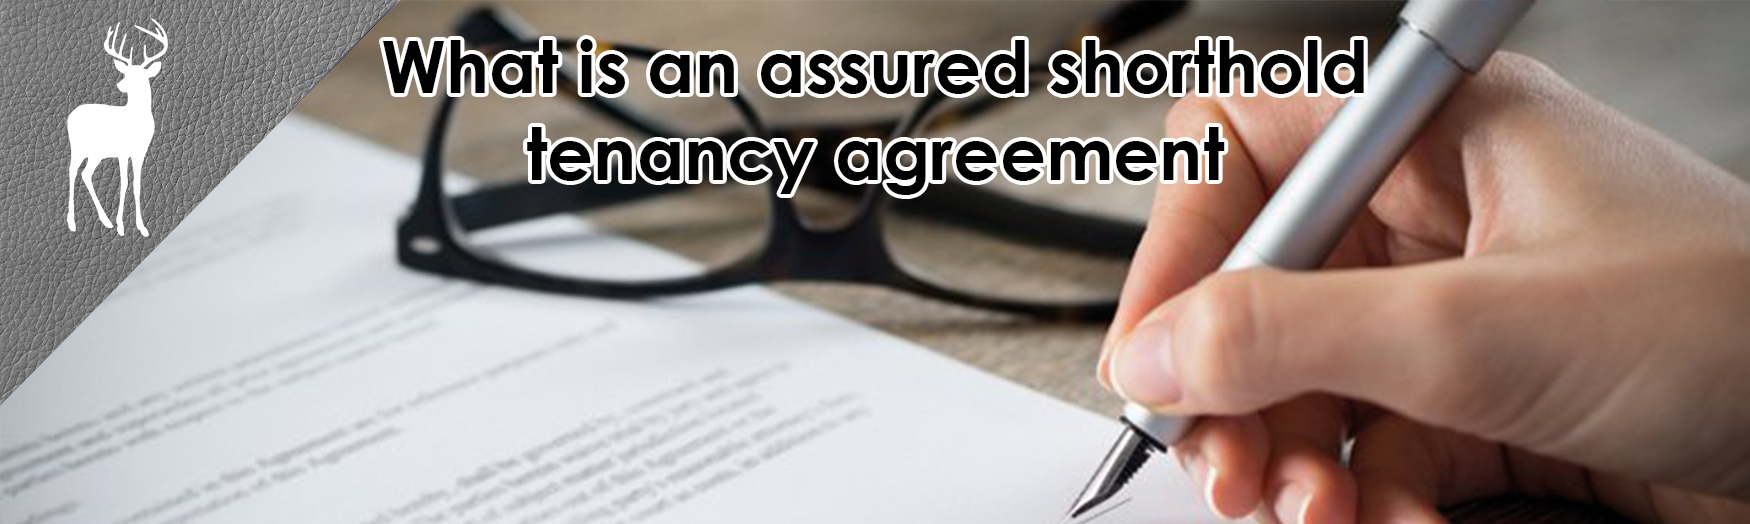 what is an assured shorthold tenancy agreement, landlord lettings contract, landlord guide to contracts, landlords guide to tenancy agreements